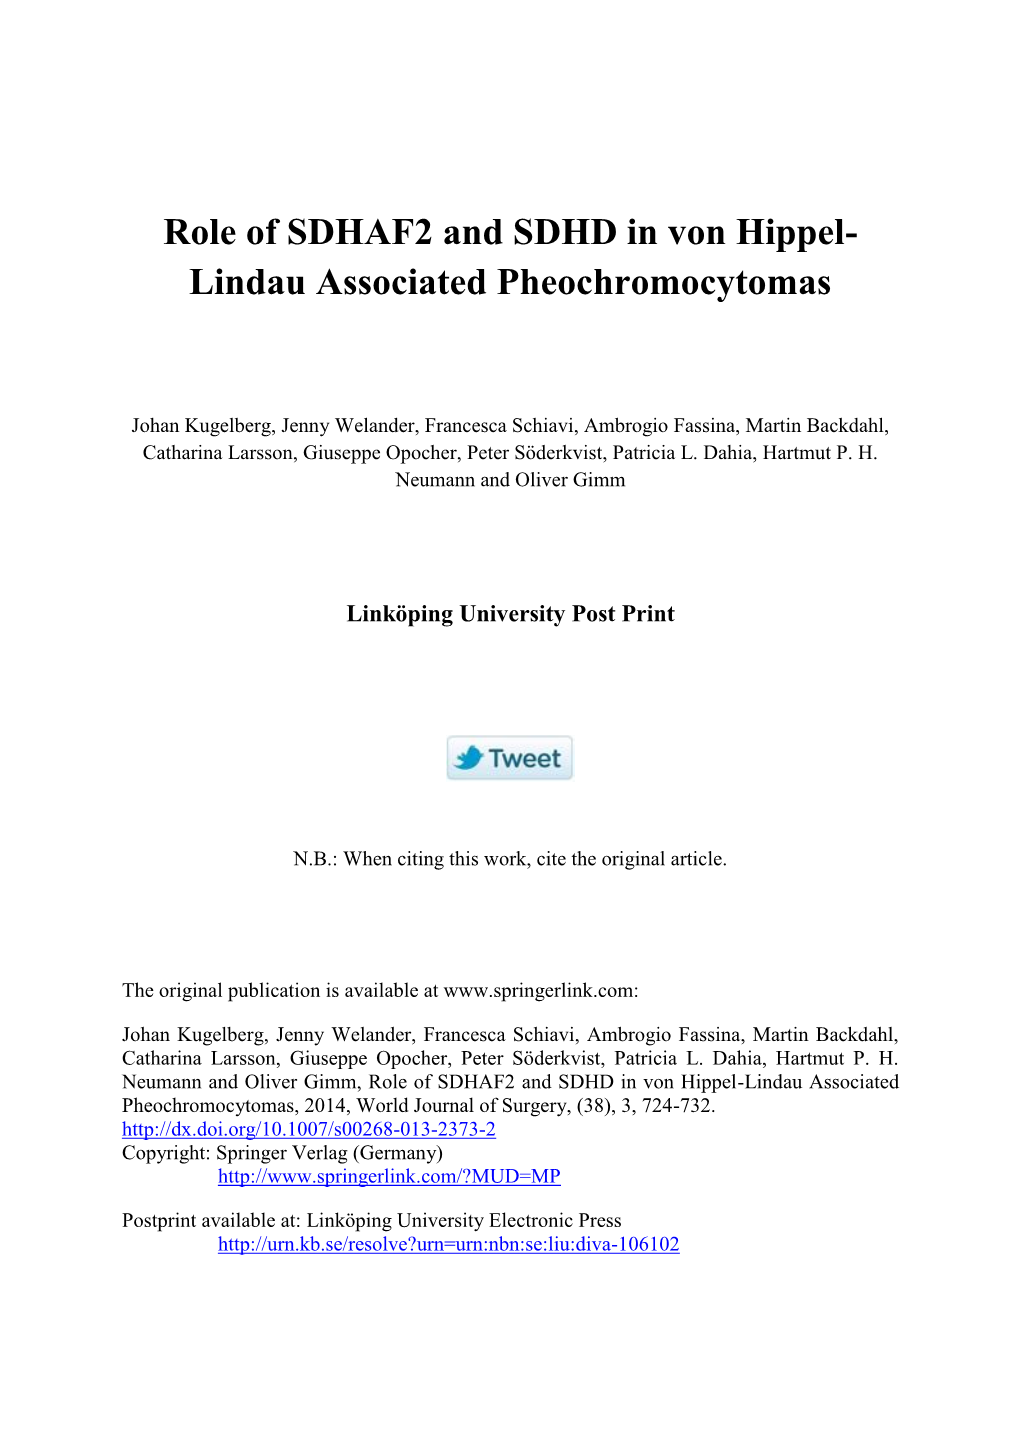 Role of SDHAF2 and SDHD in Von Hippel-Lindau Associated Pheochromocytomas, 2014, World Journal of Surgery, (38), 3, 724-732